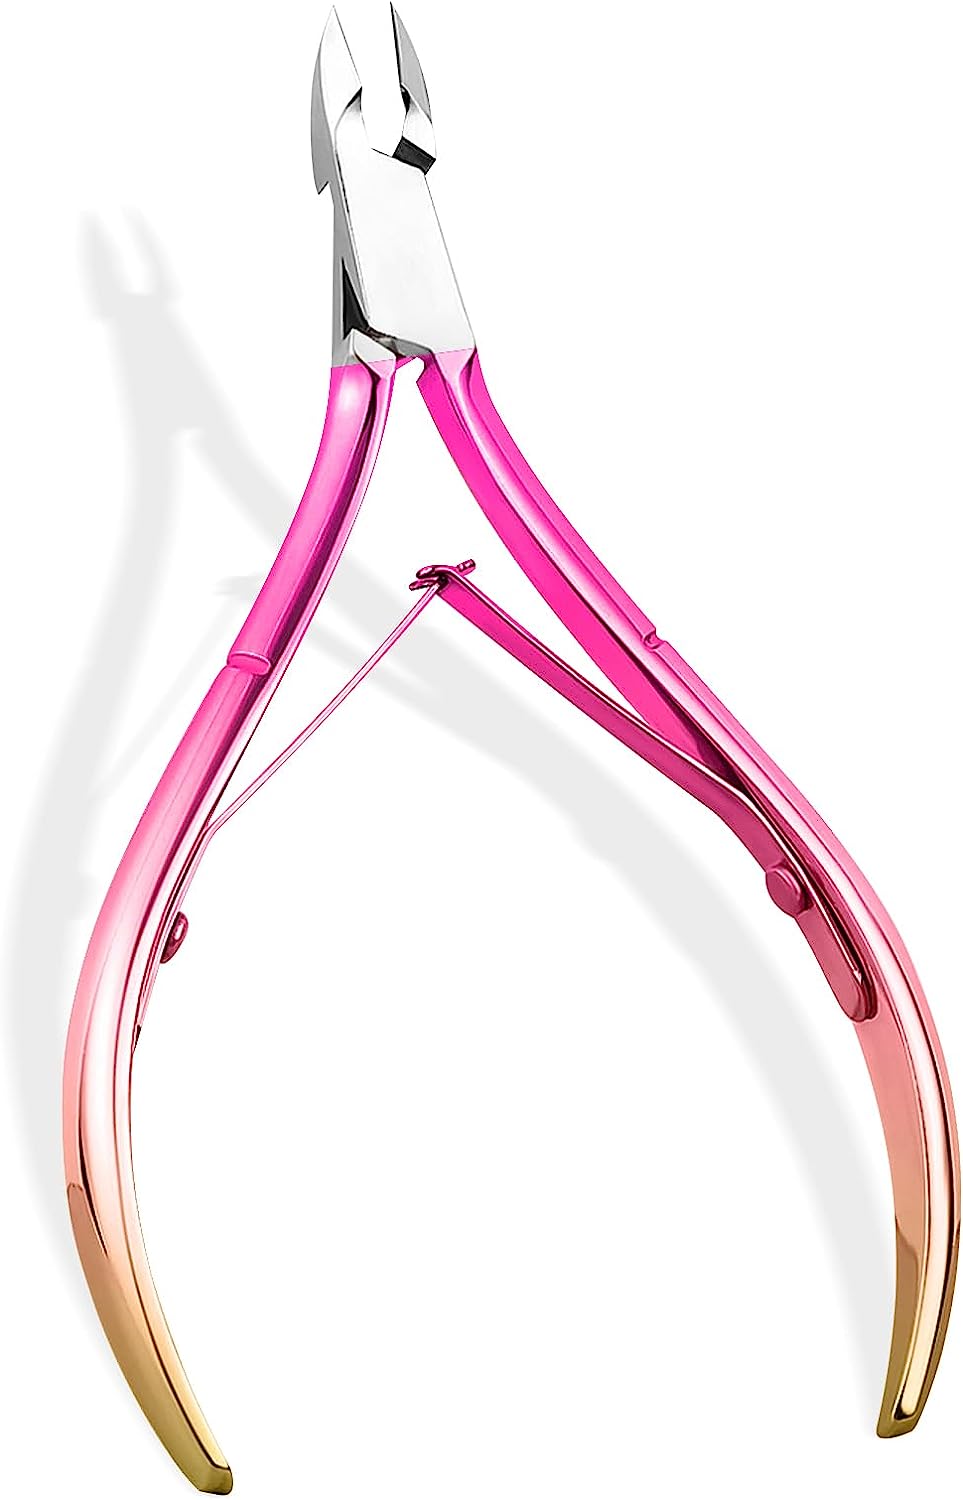 Professional Cuticle Clipper, Cuticle Remover, Stainless Steel Cuticle Scissors, Sharp Cut, Fine for Removing Excess Cracked Skin on Fingers and Toes, Pink Gradient